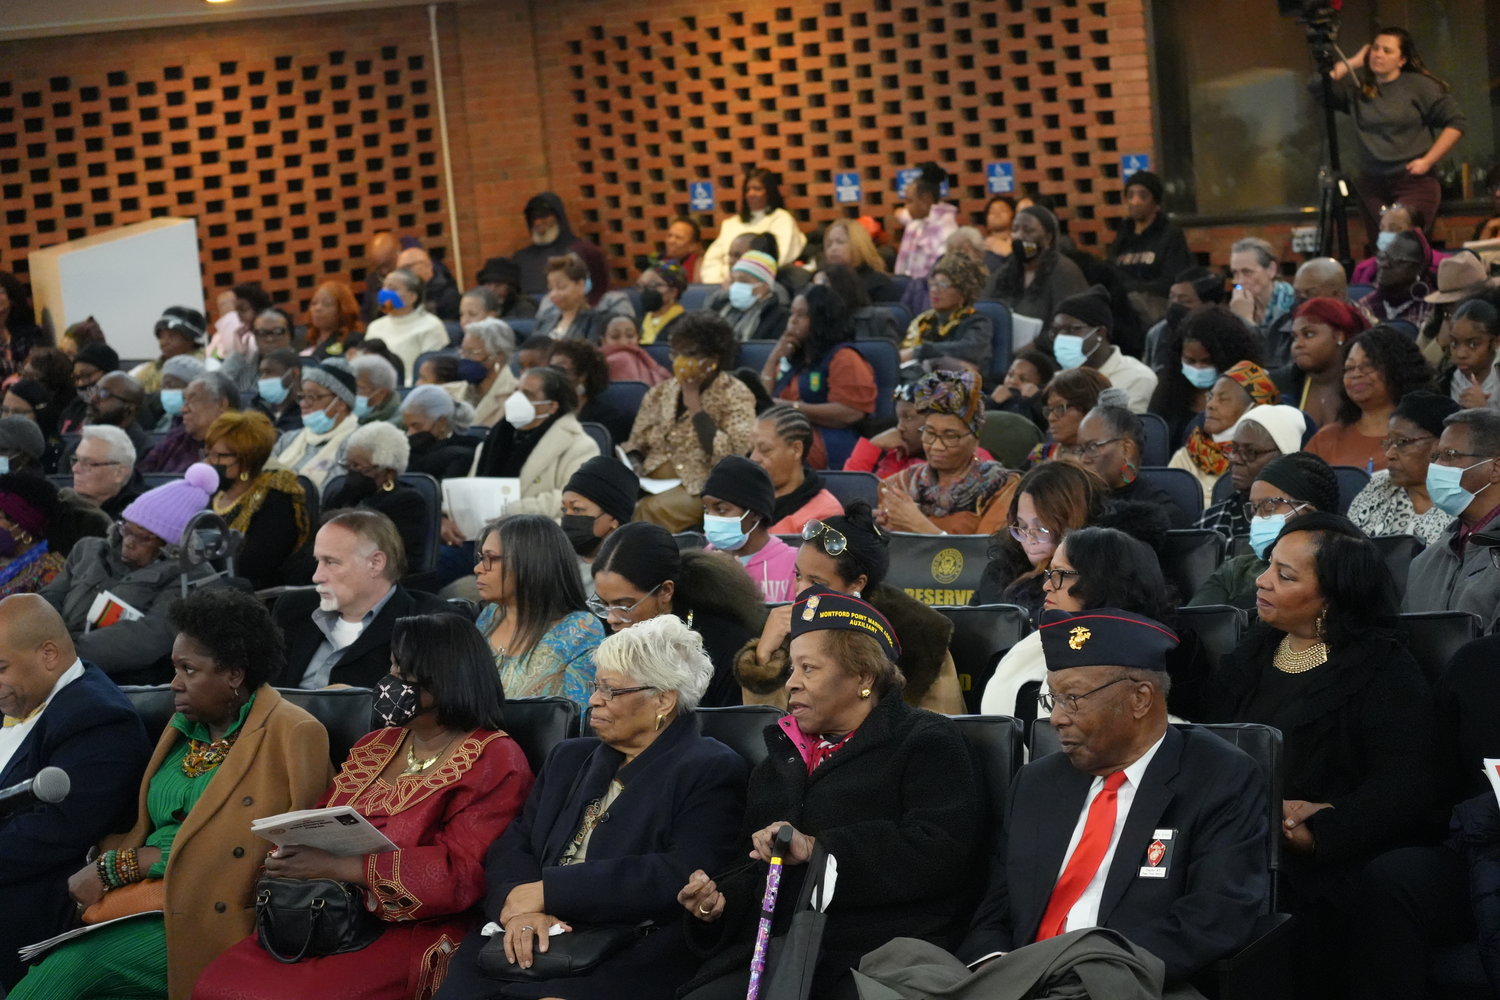 The inside of the Nathan L.H. Pavilion at Hempstead Town Hall was packed to the brim with hundreds of people in attendance for the town’s Black History Month celebration. The program focused on the theme of ‘Black Resistance,’ which recognized African Americans and their fight against oppression across the nation.